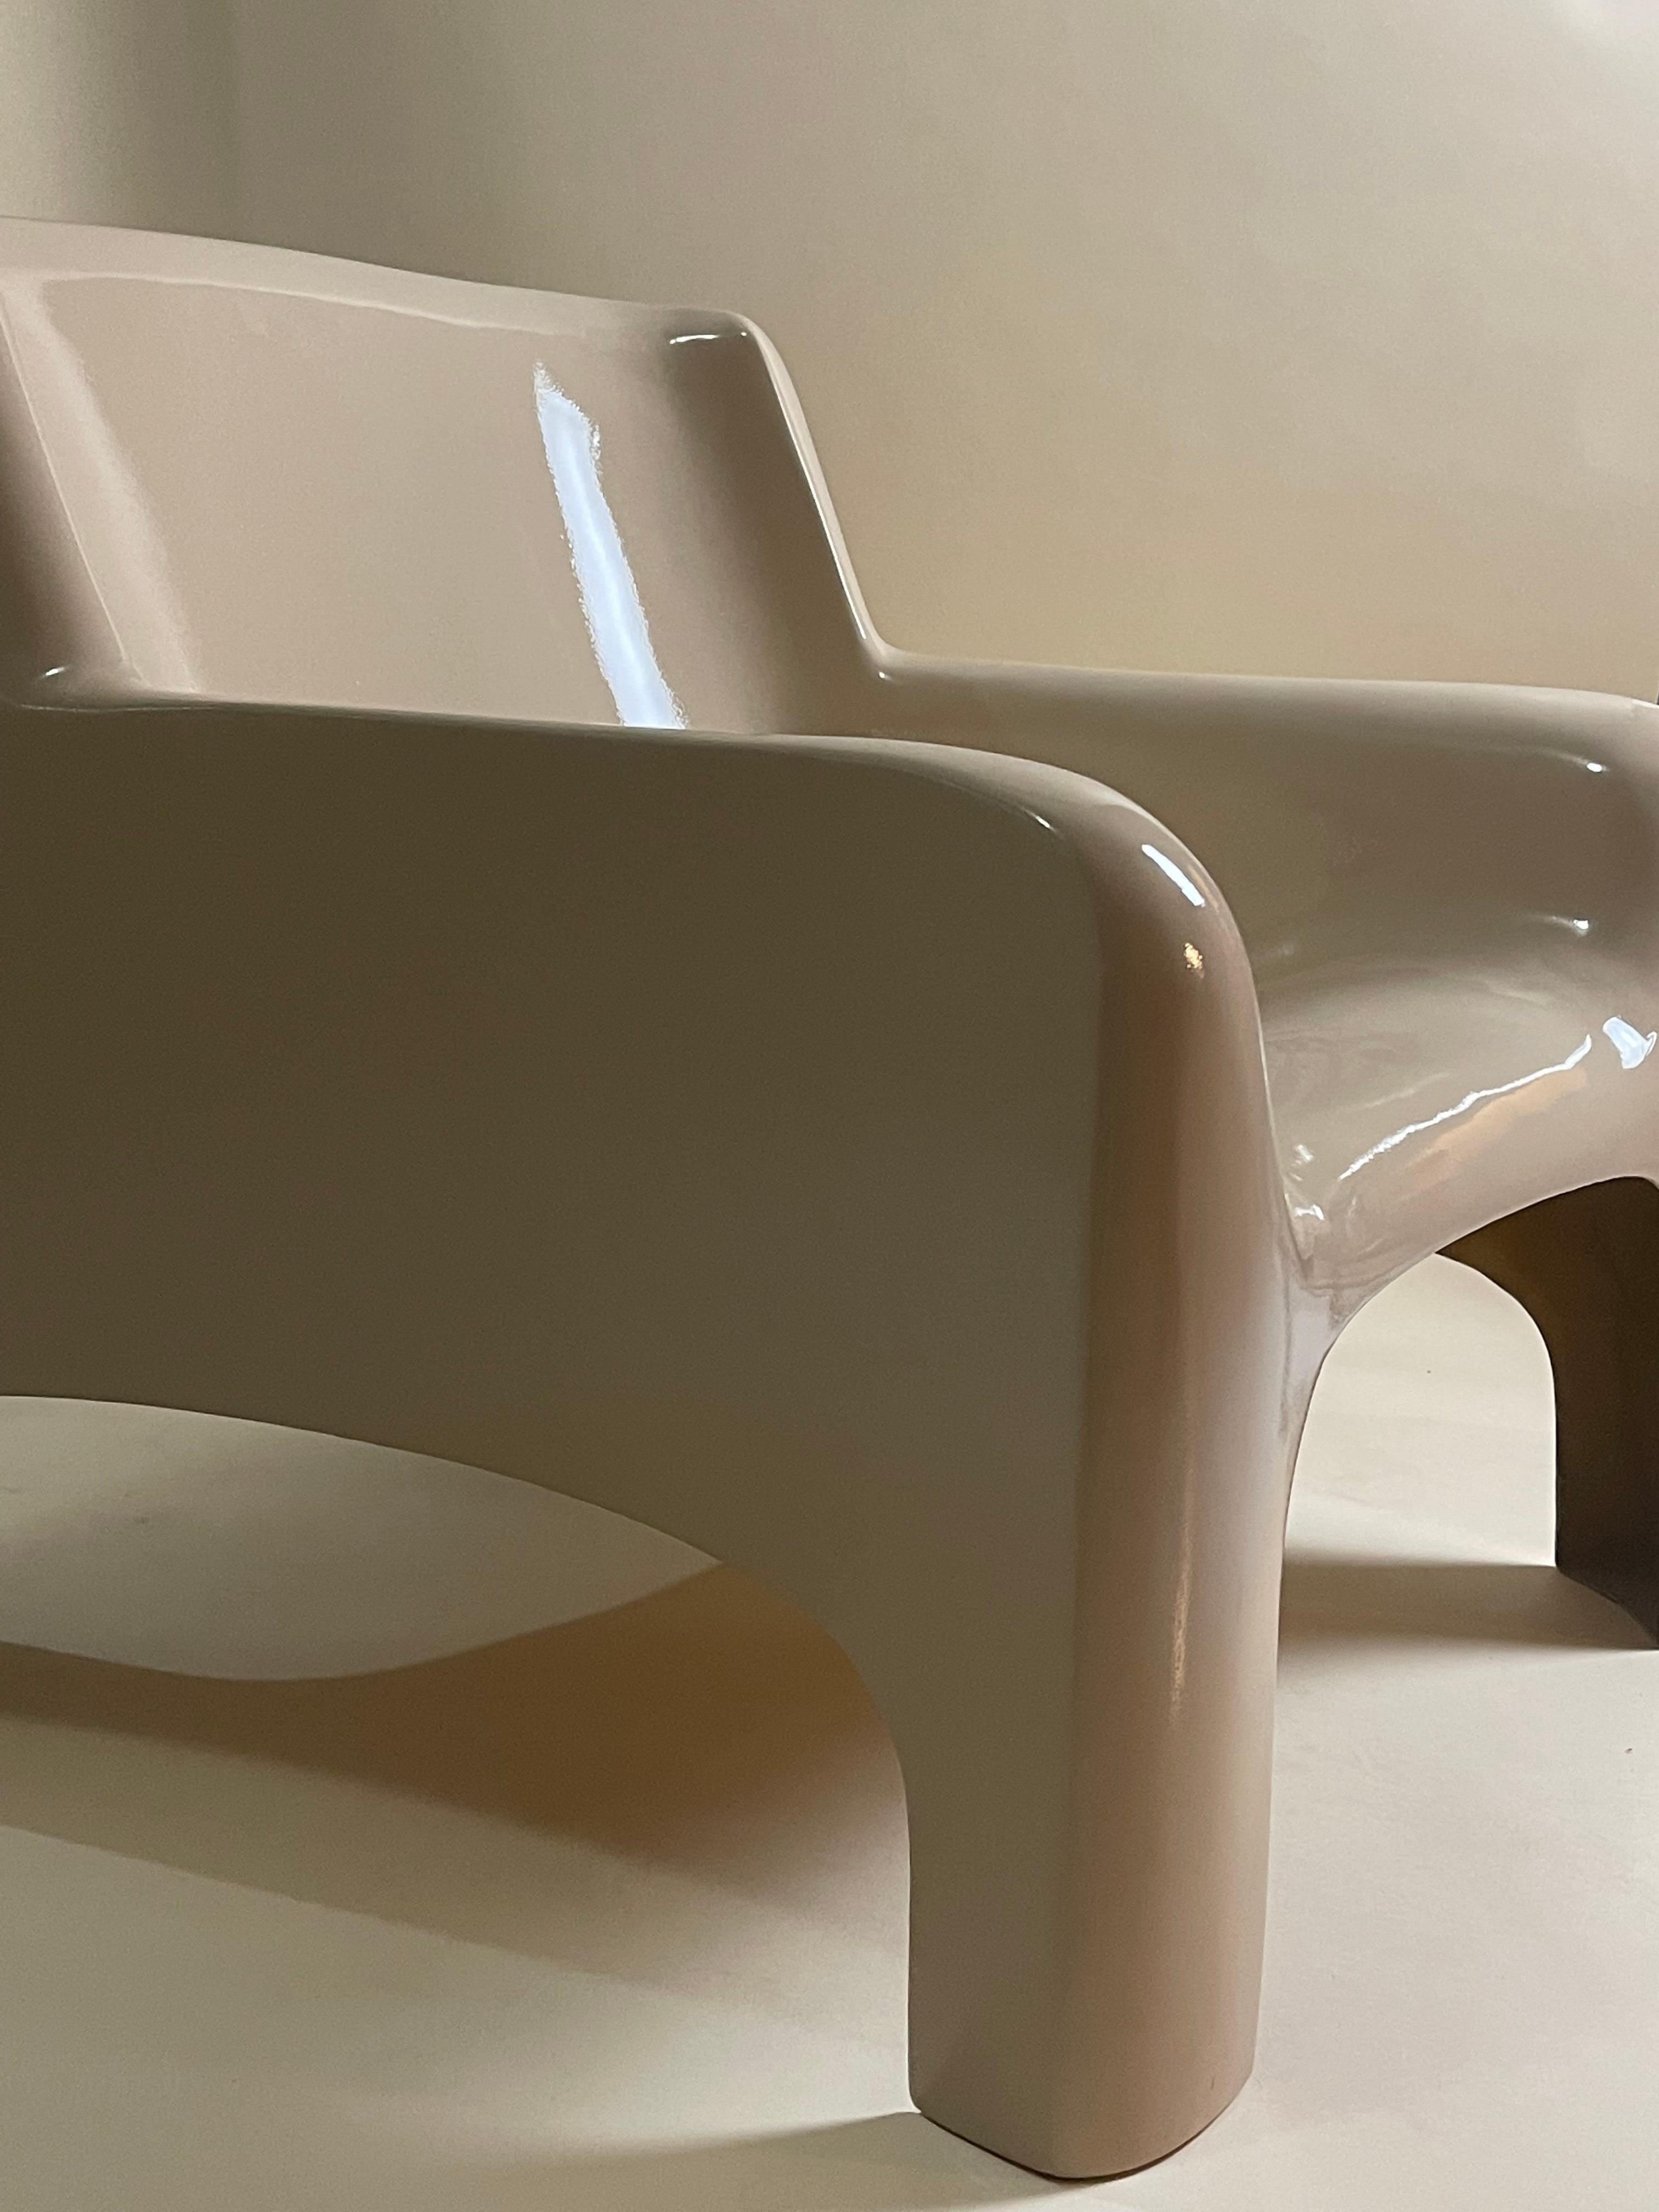 Rare Carlo Bartoli for Arflex Gaia chair in a cappuccino color. This unique design ensures equal weight distribution for the sitter resulting in a higher than expected comfort level.